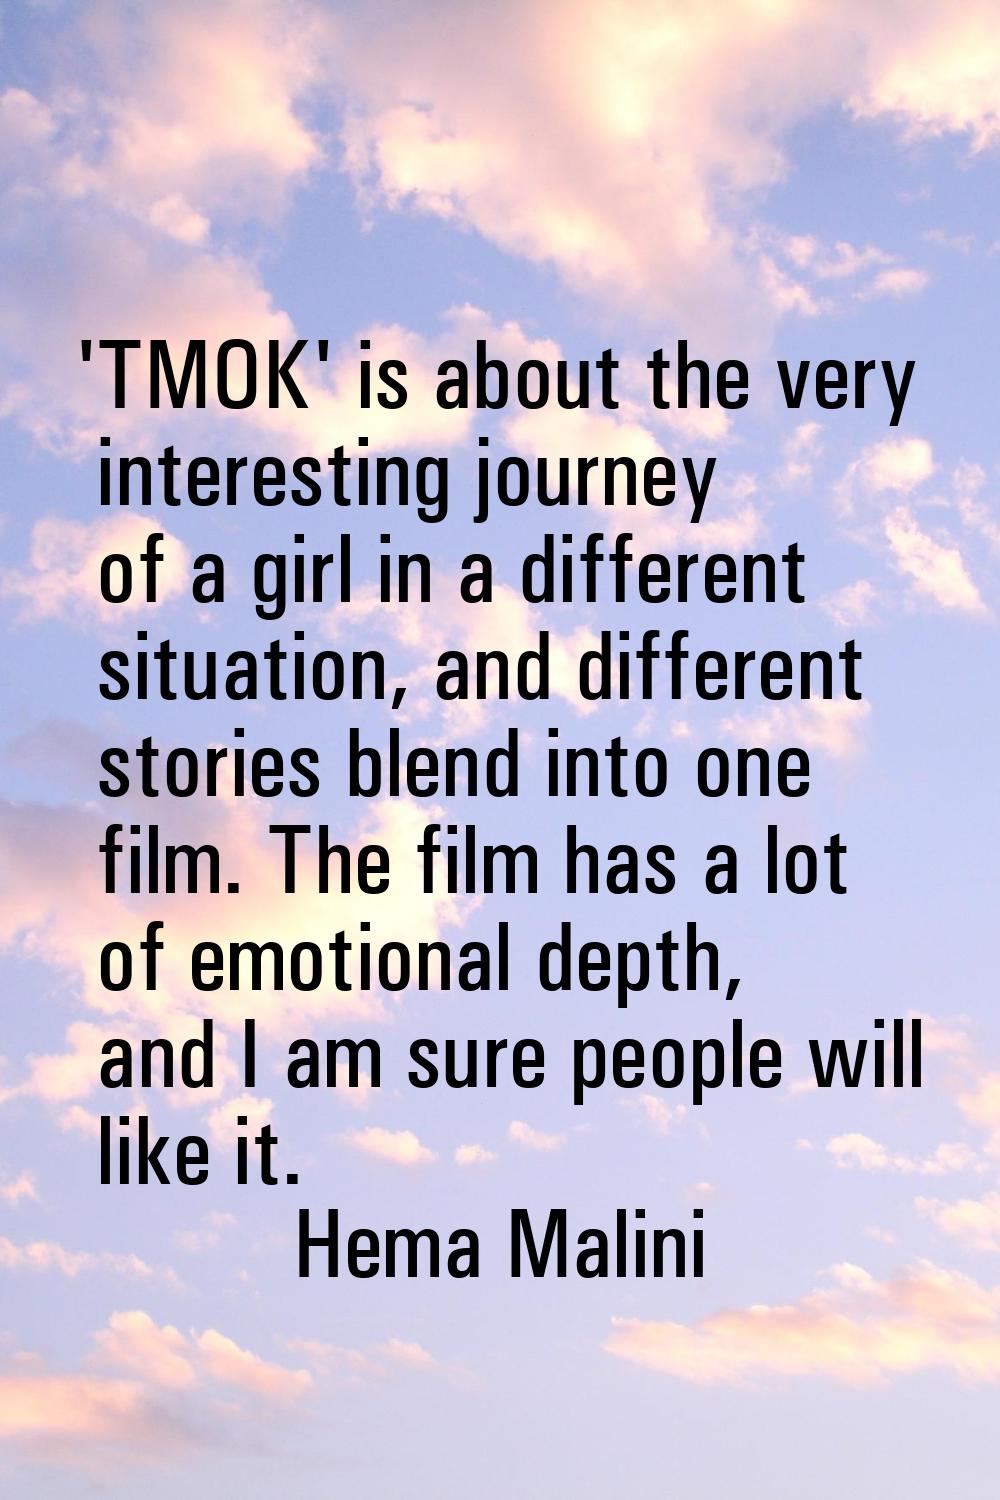 'TMOK' is about the very interesting journey of a girl in a different situation, and different stor